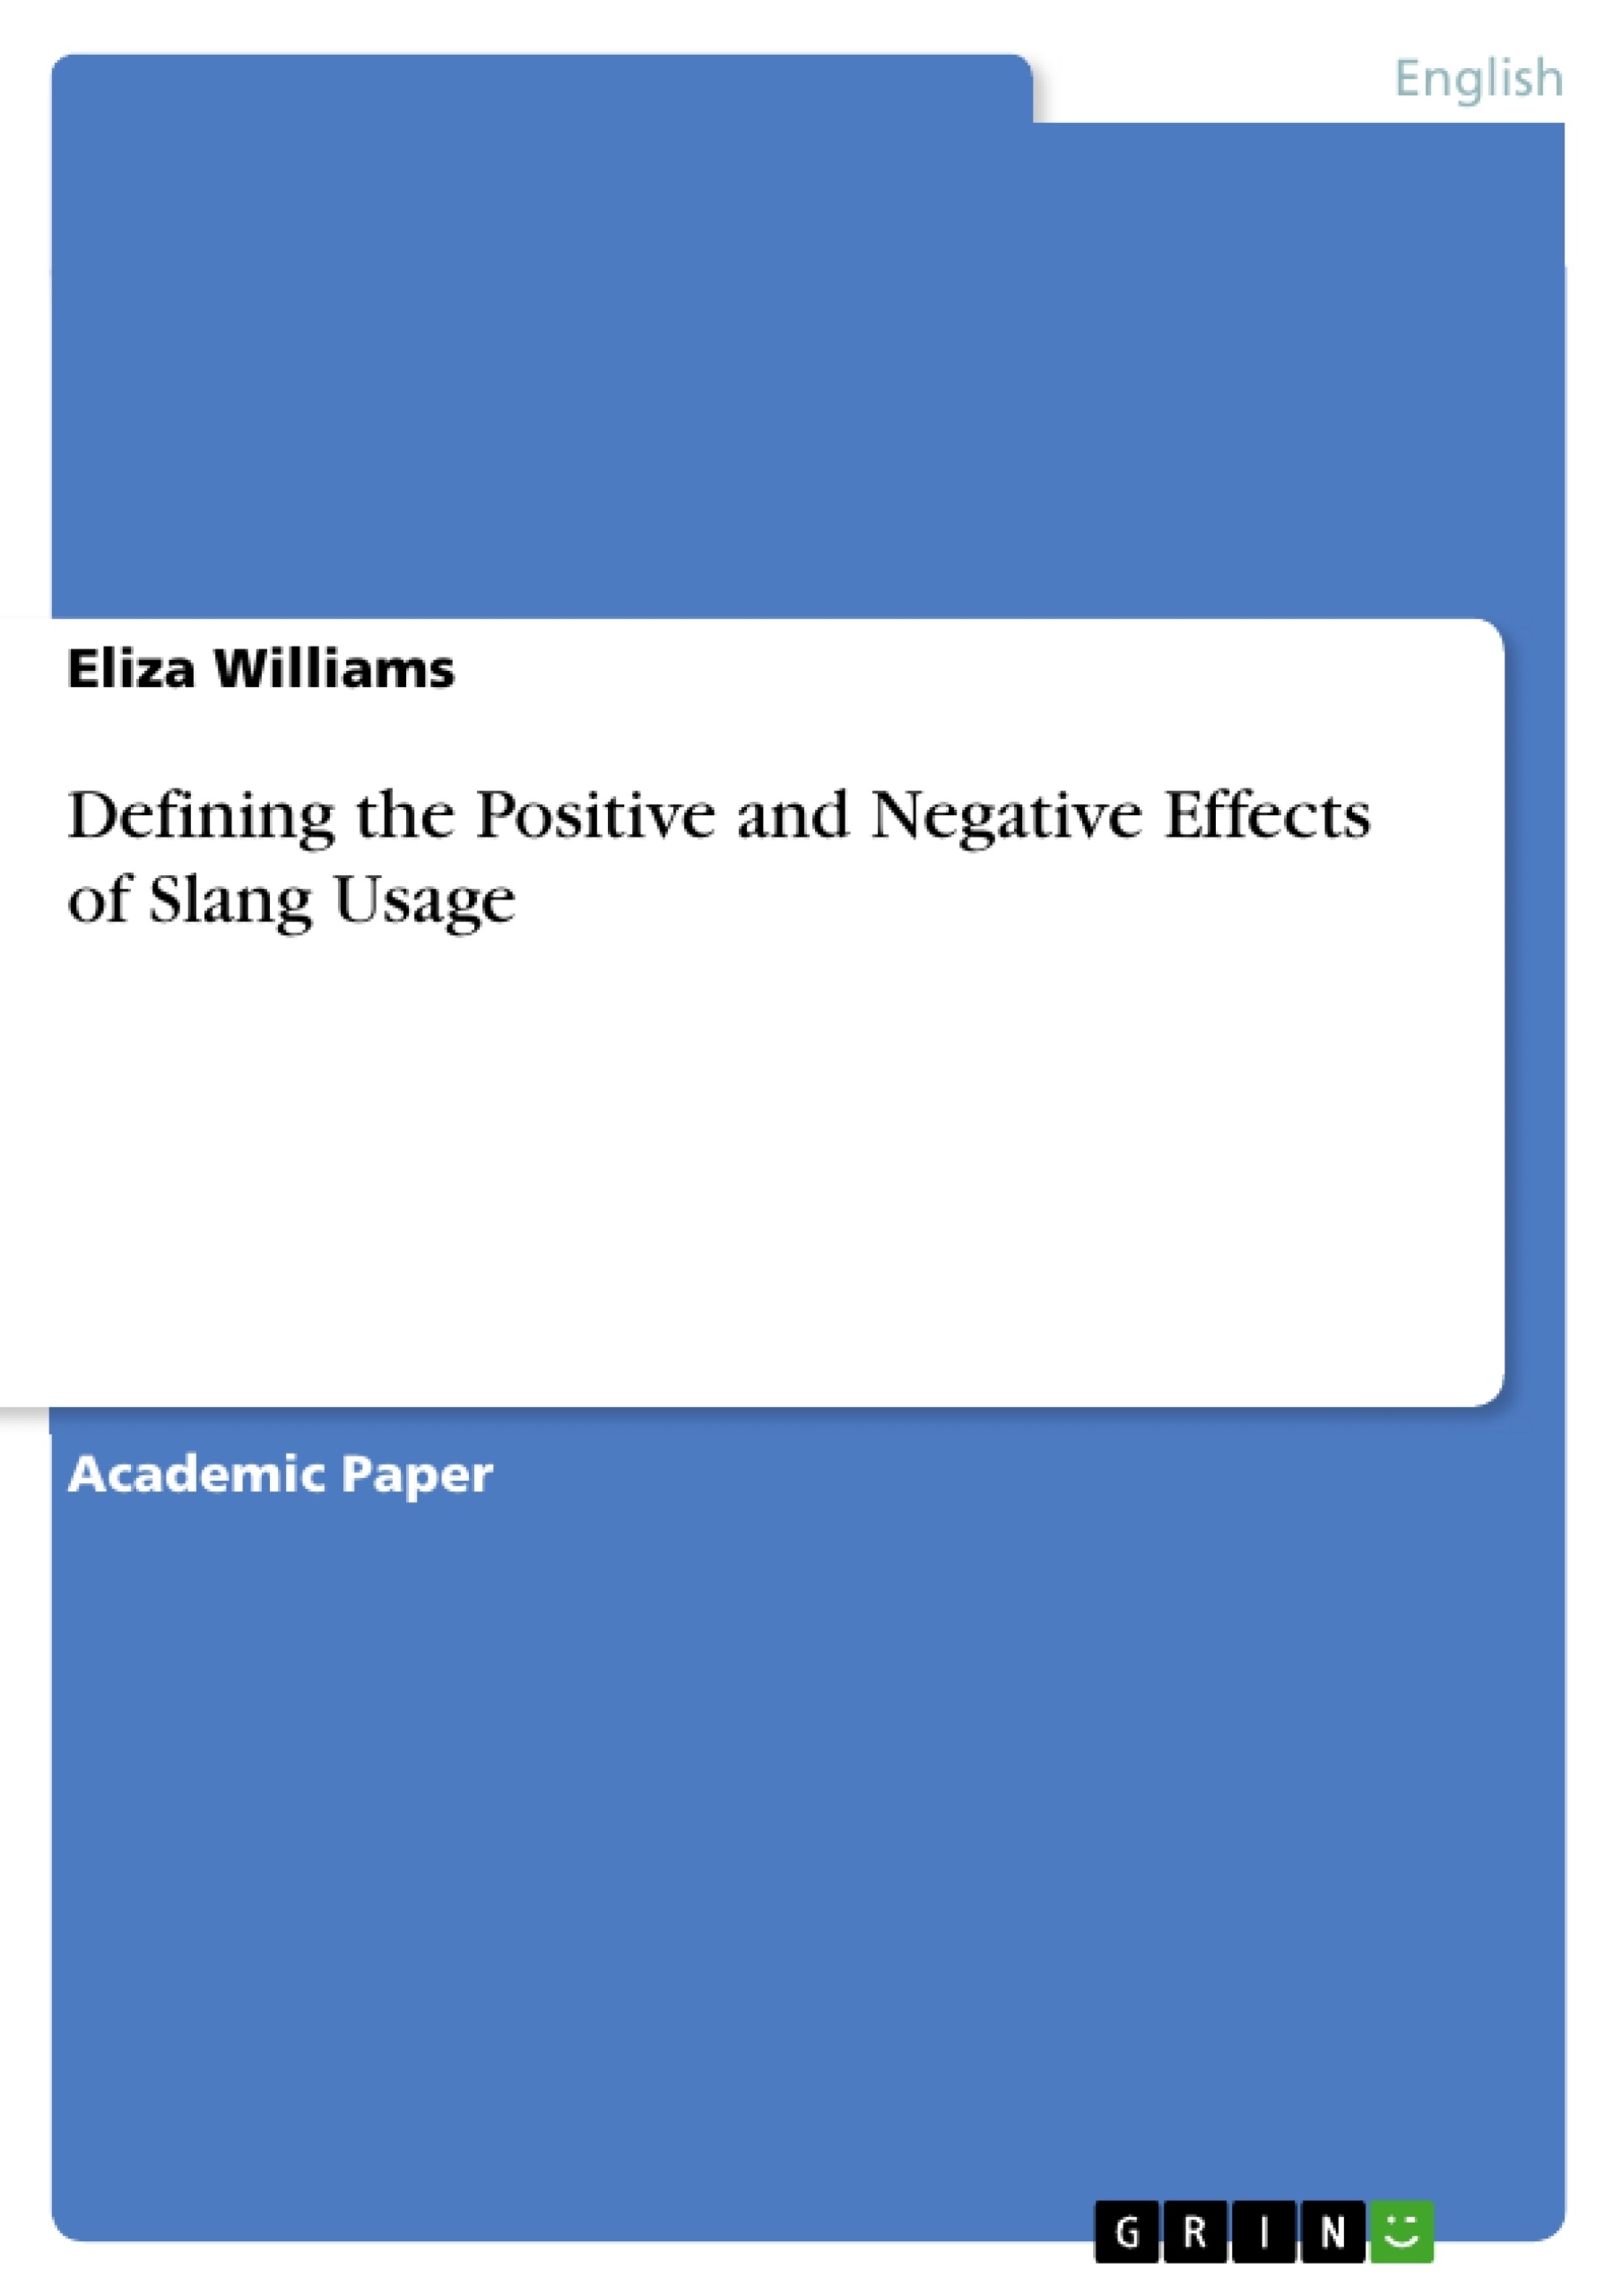 Title: Defining the Positive and Negative Effects of Slang Usage